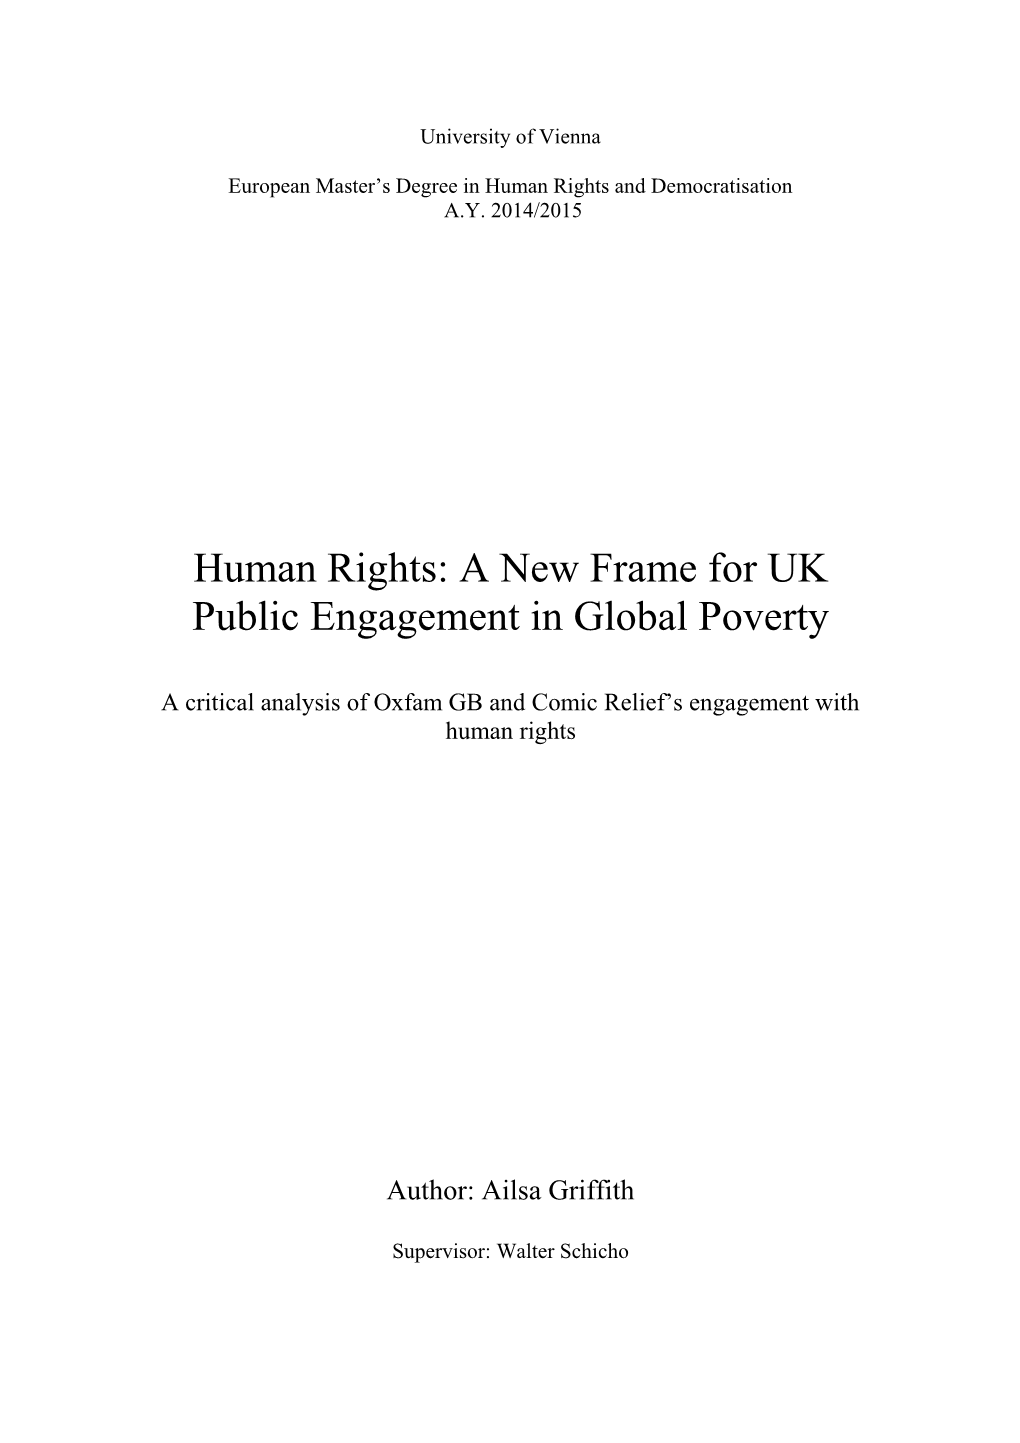 Human Rights: a New Frame for UK Public Engagement in Global Poverty